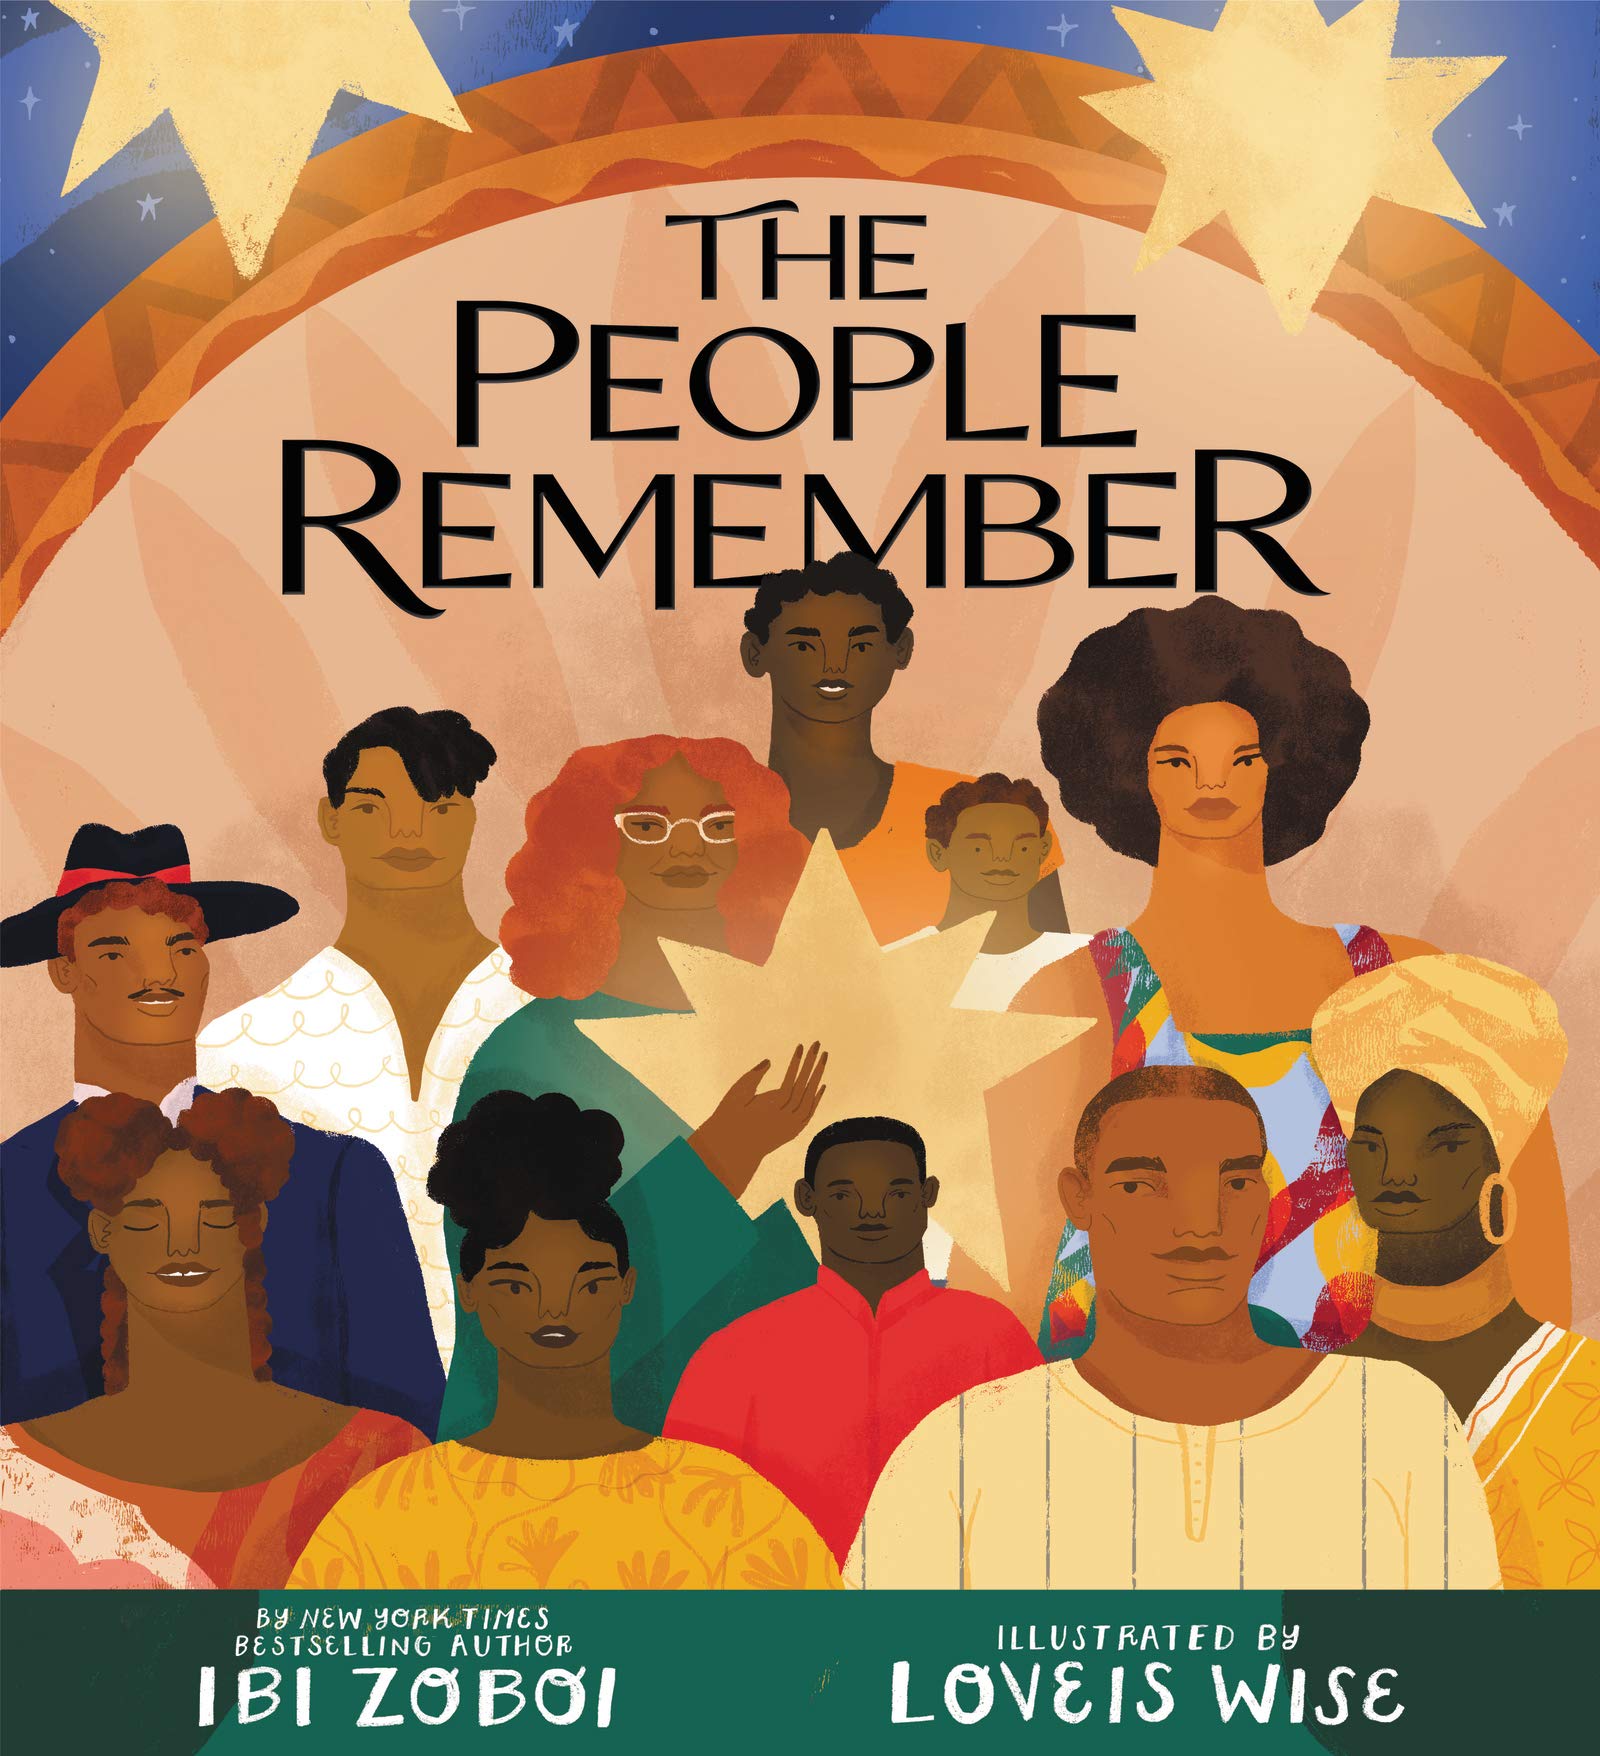 The people remember book cover.